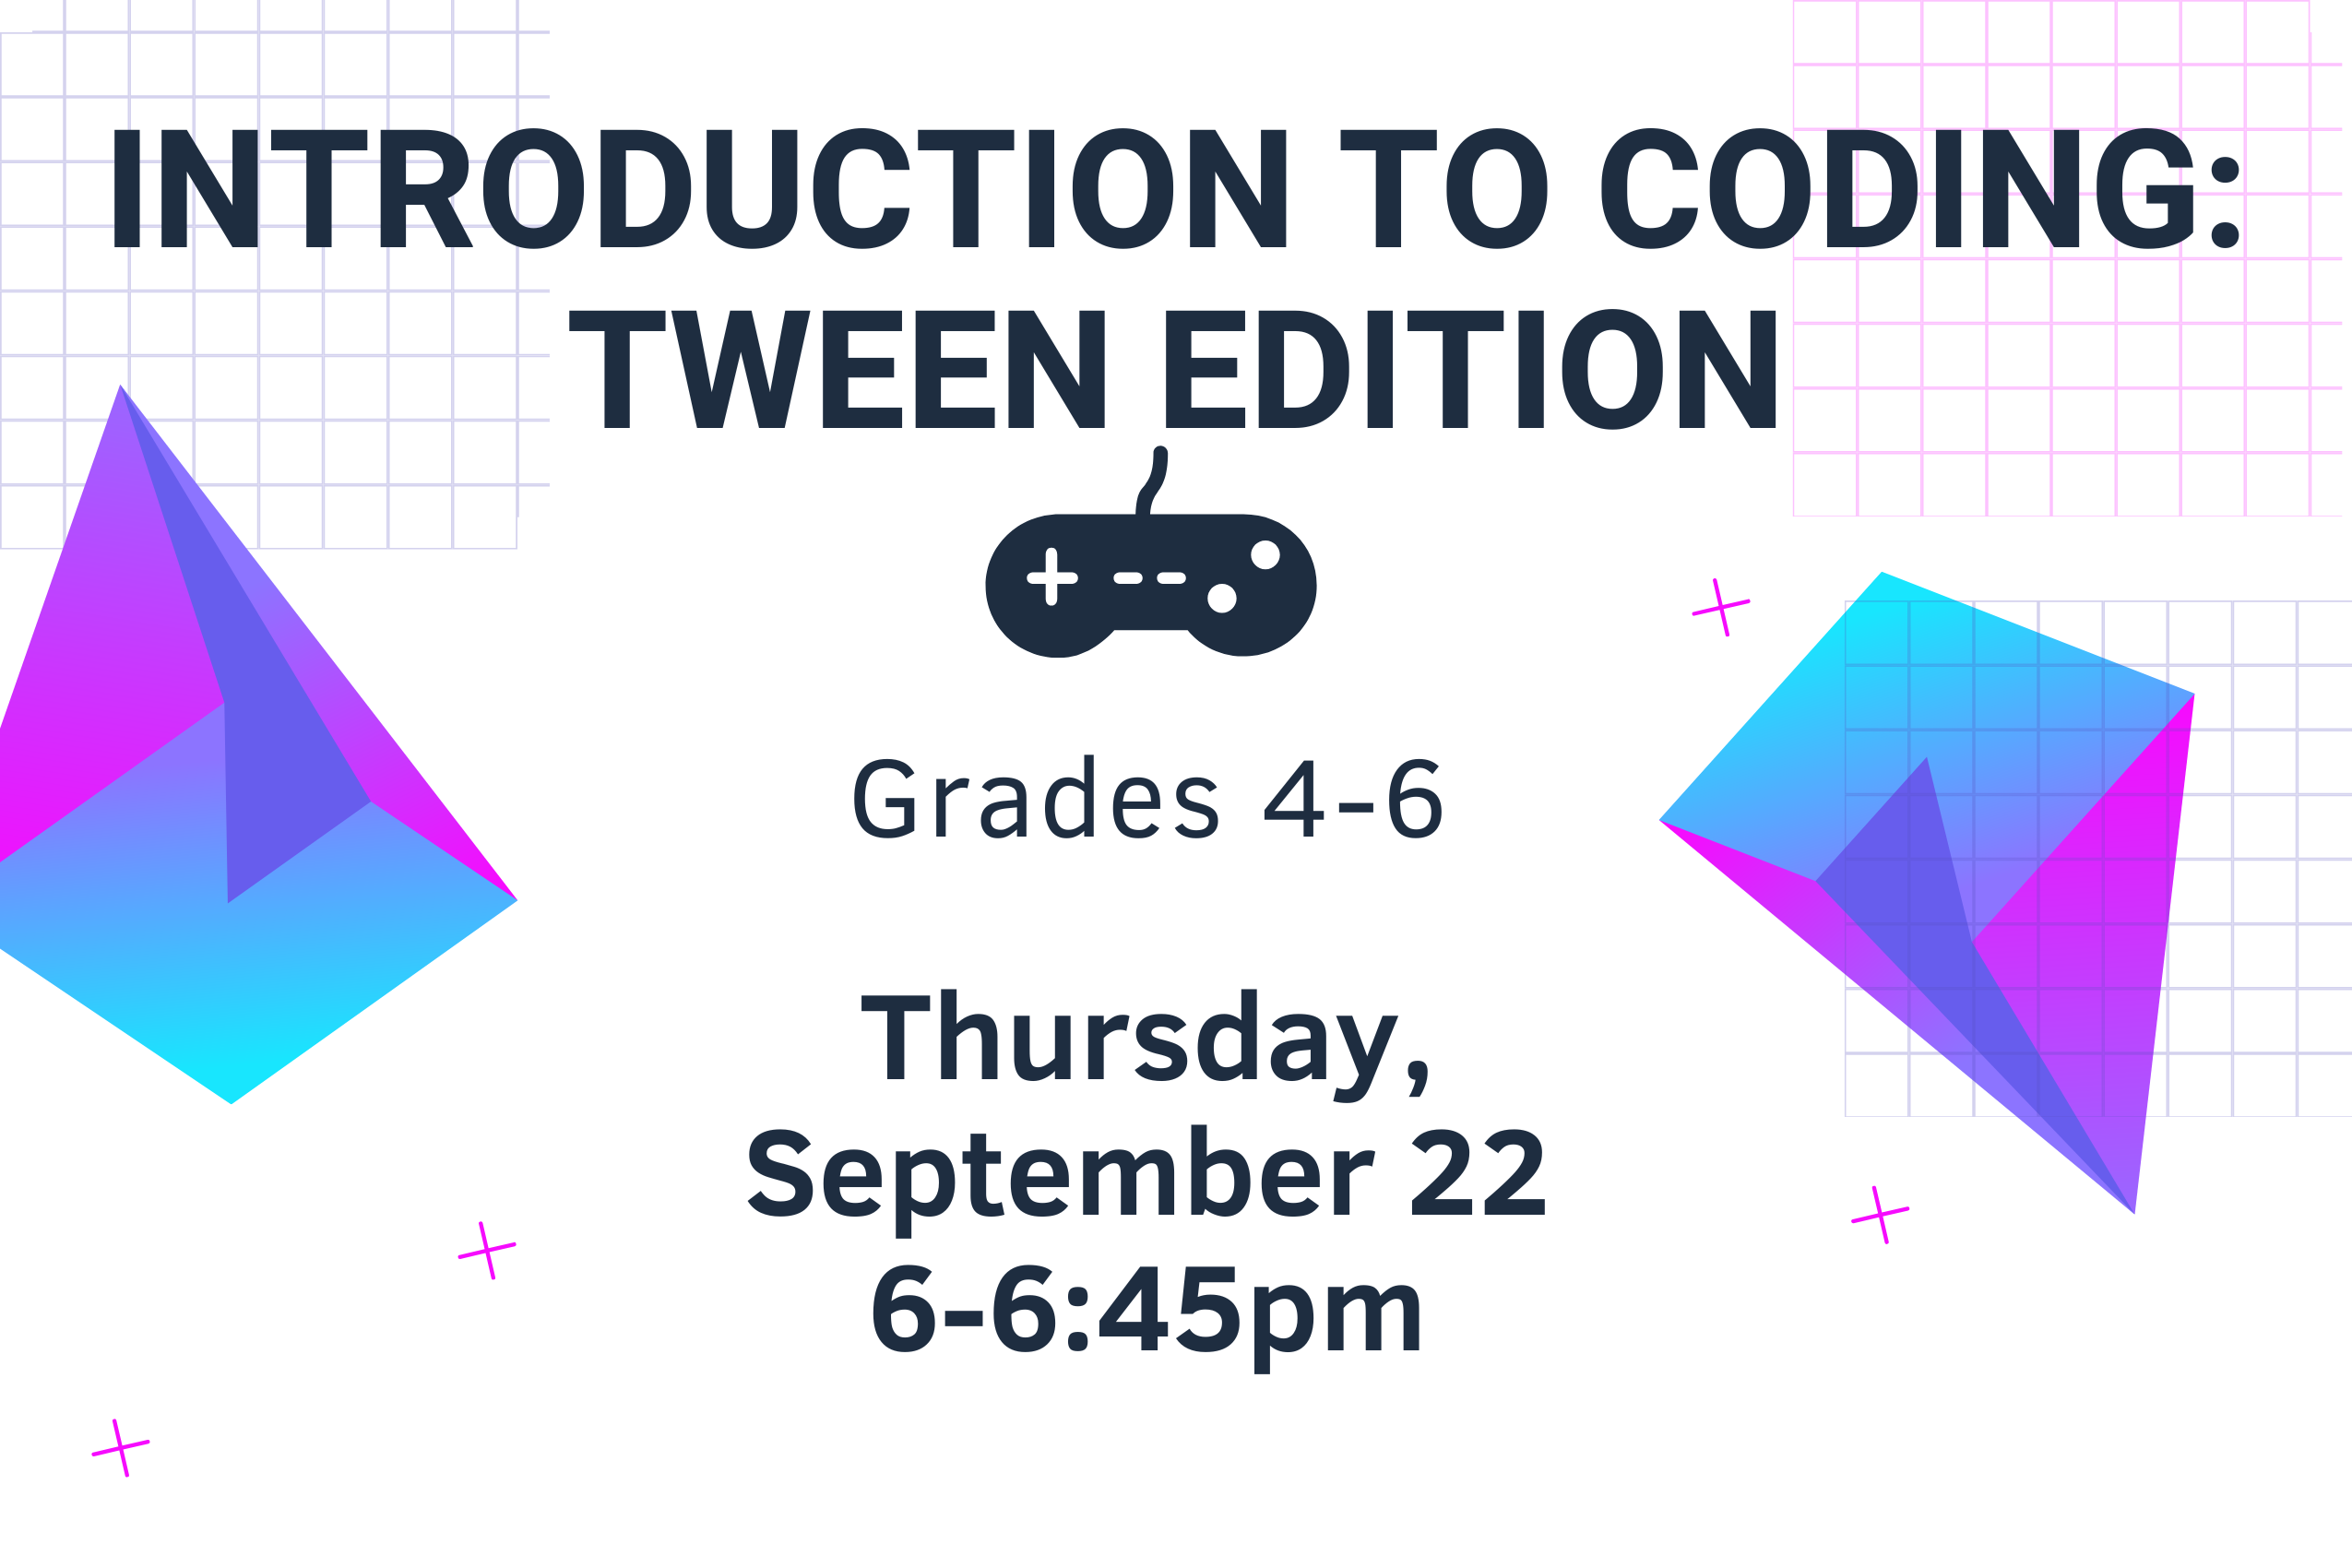 Program flyer with the following text, "Introduction to Coding: Tween Edition. Grades 4-6. Thursday, September 22. 6-6:45pm. "